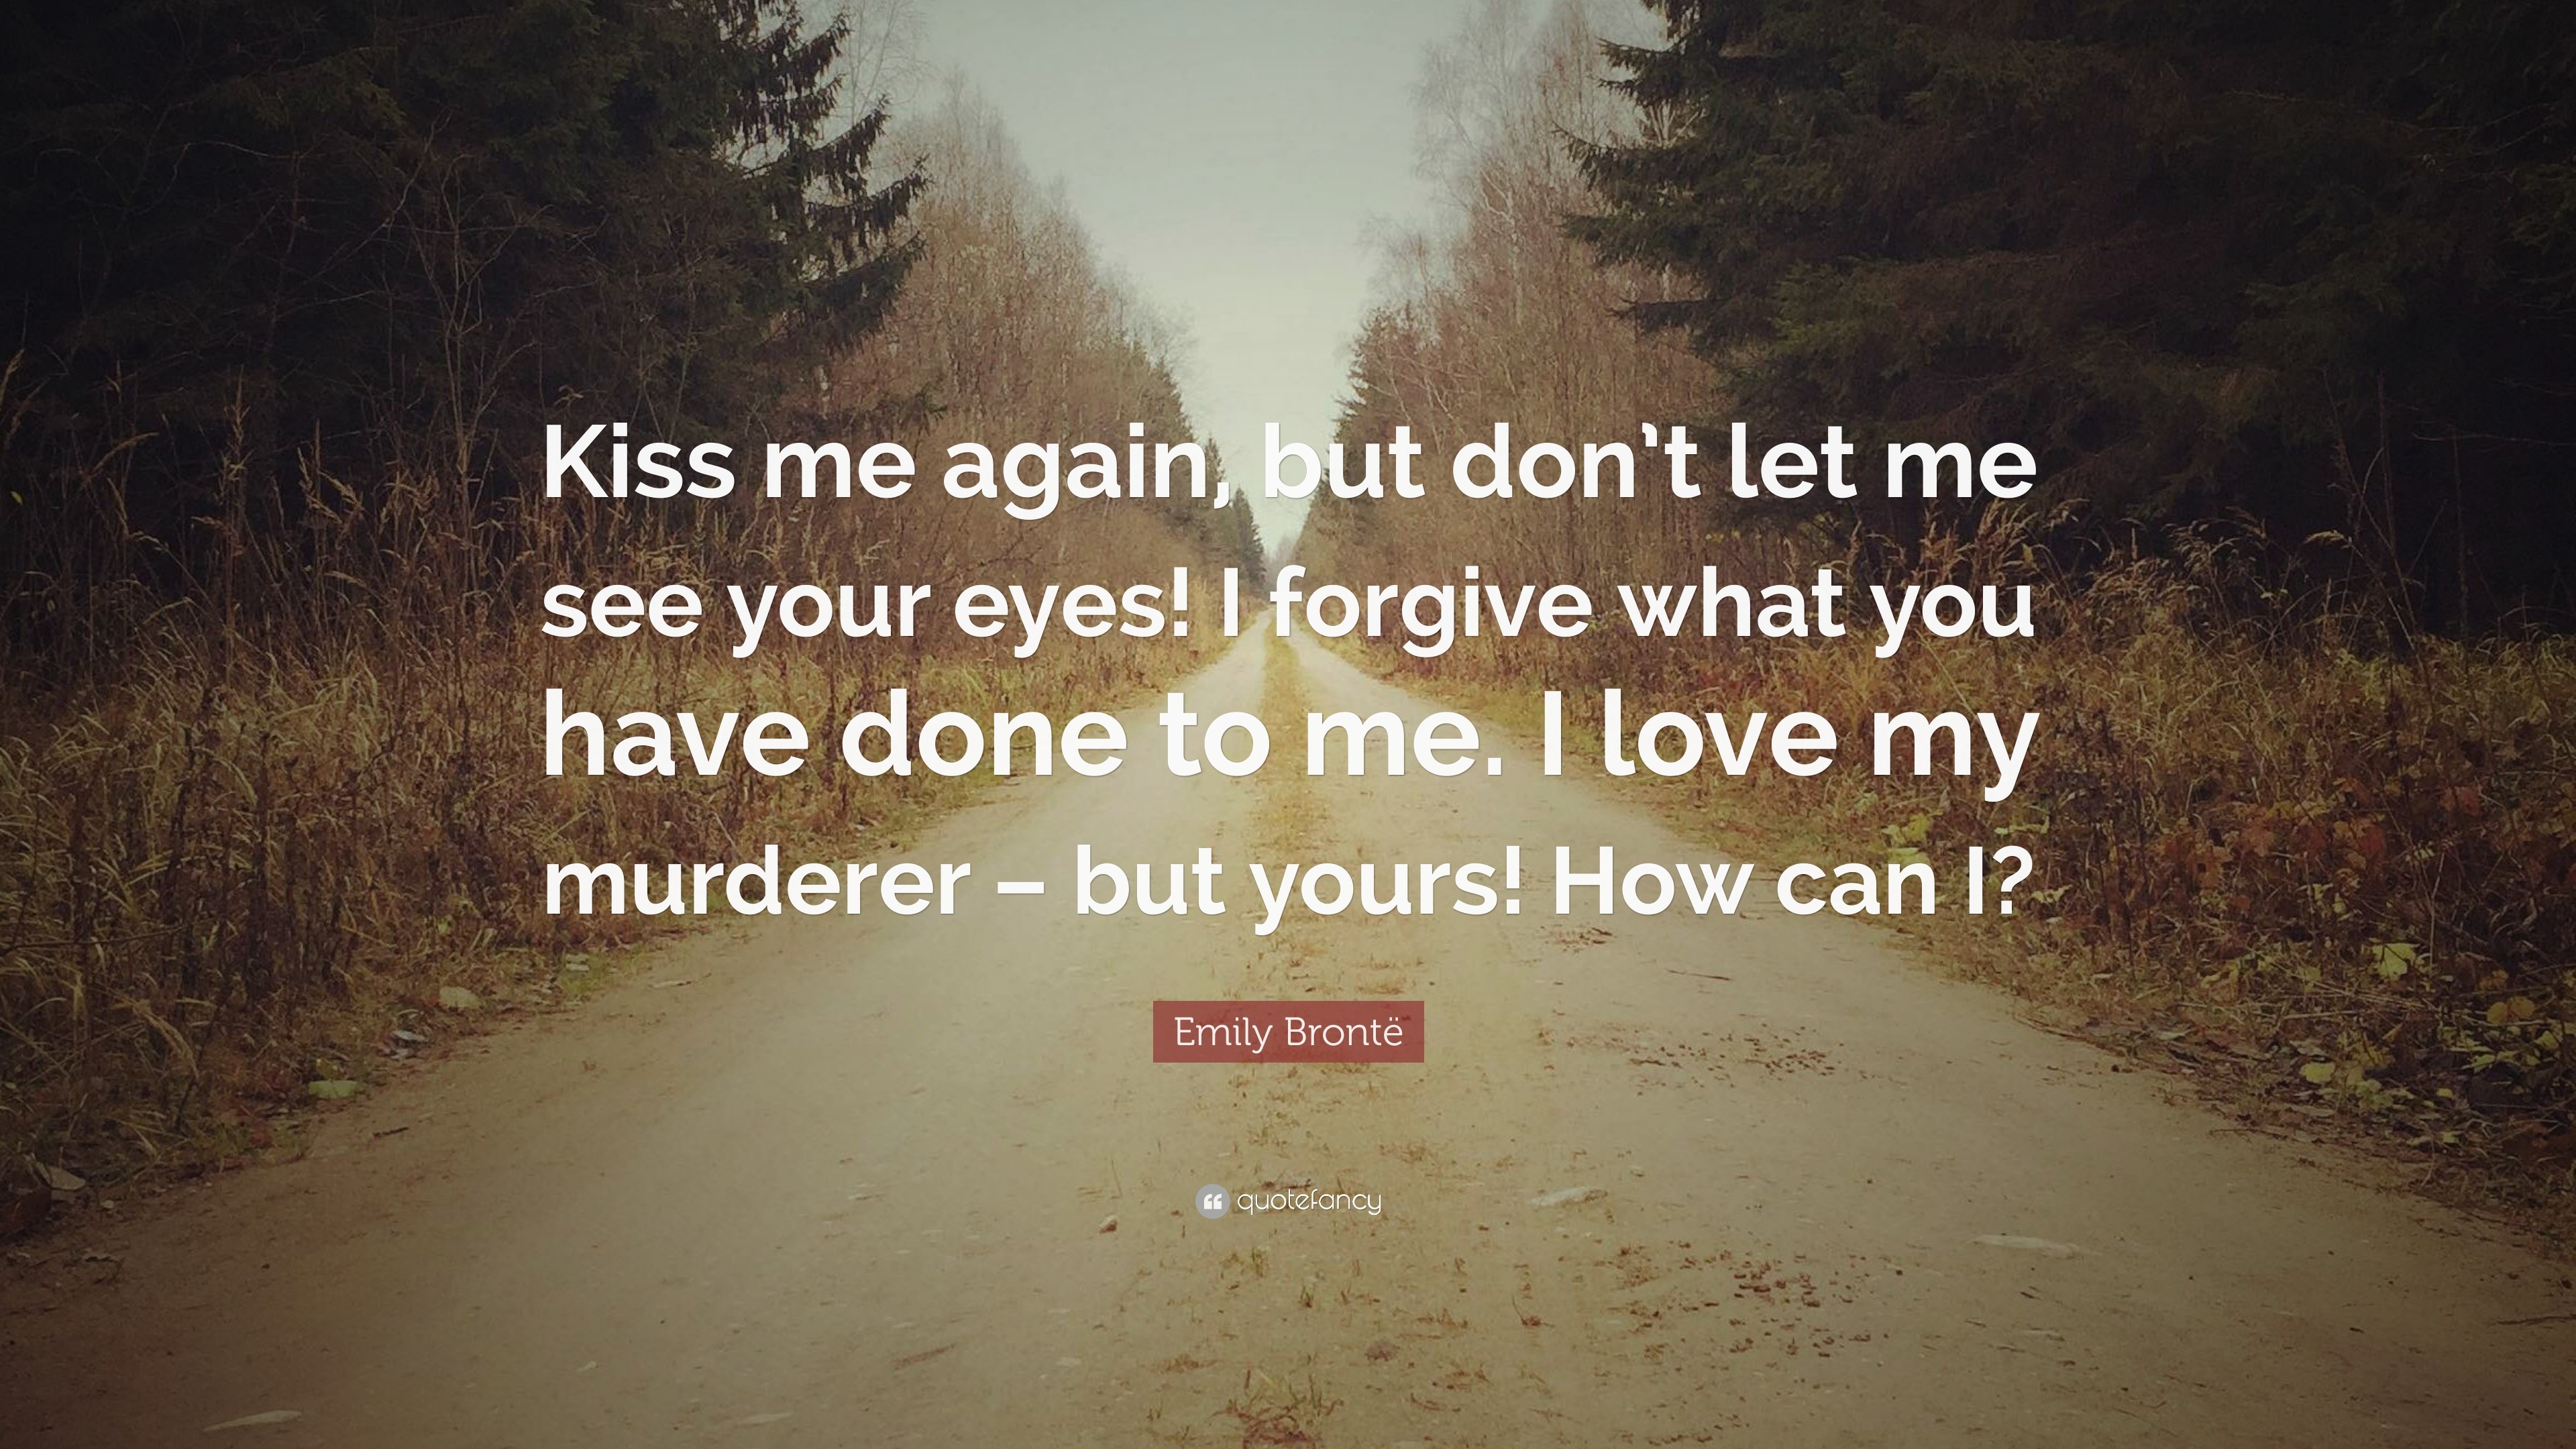 Emily Brontë Quote: “Kiss me again, but don't let me see your eyes! I  forgive what you have done to me. I love my murderer – but yours! How c...”